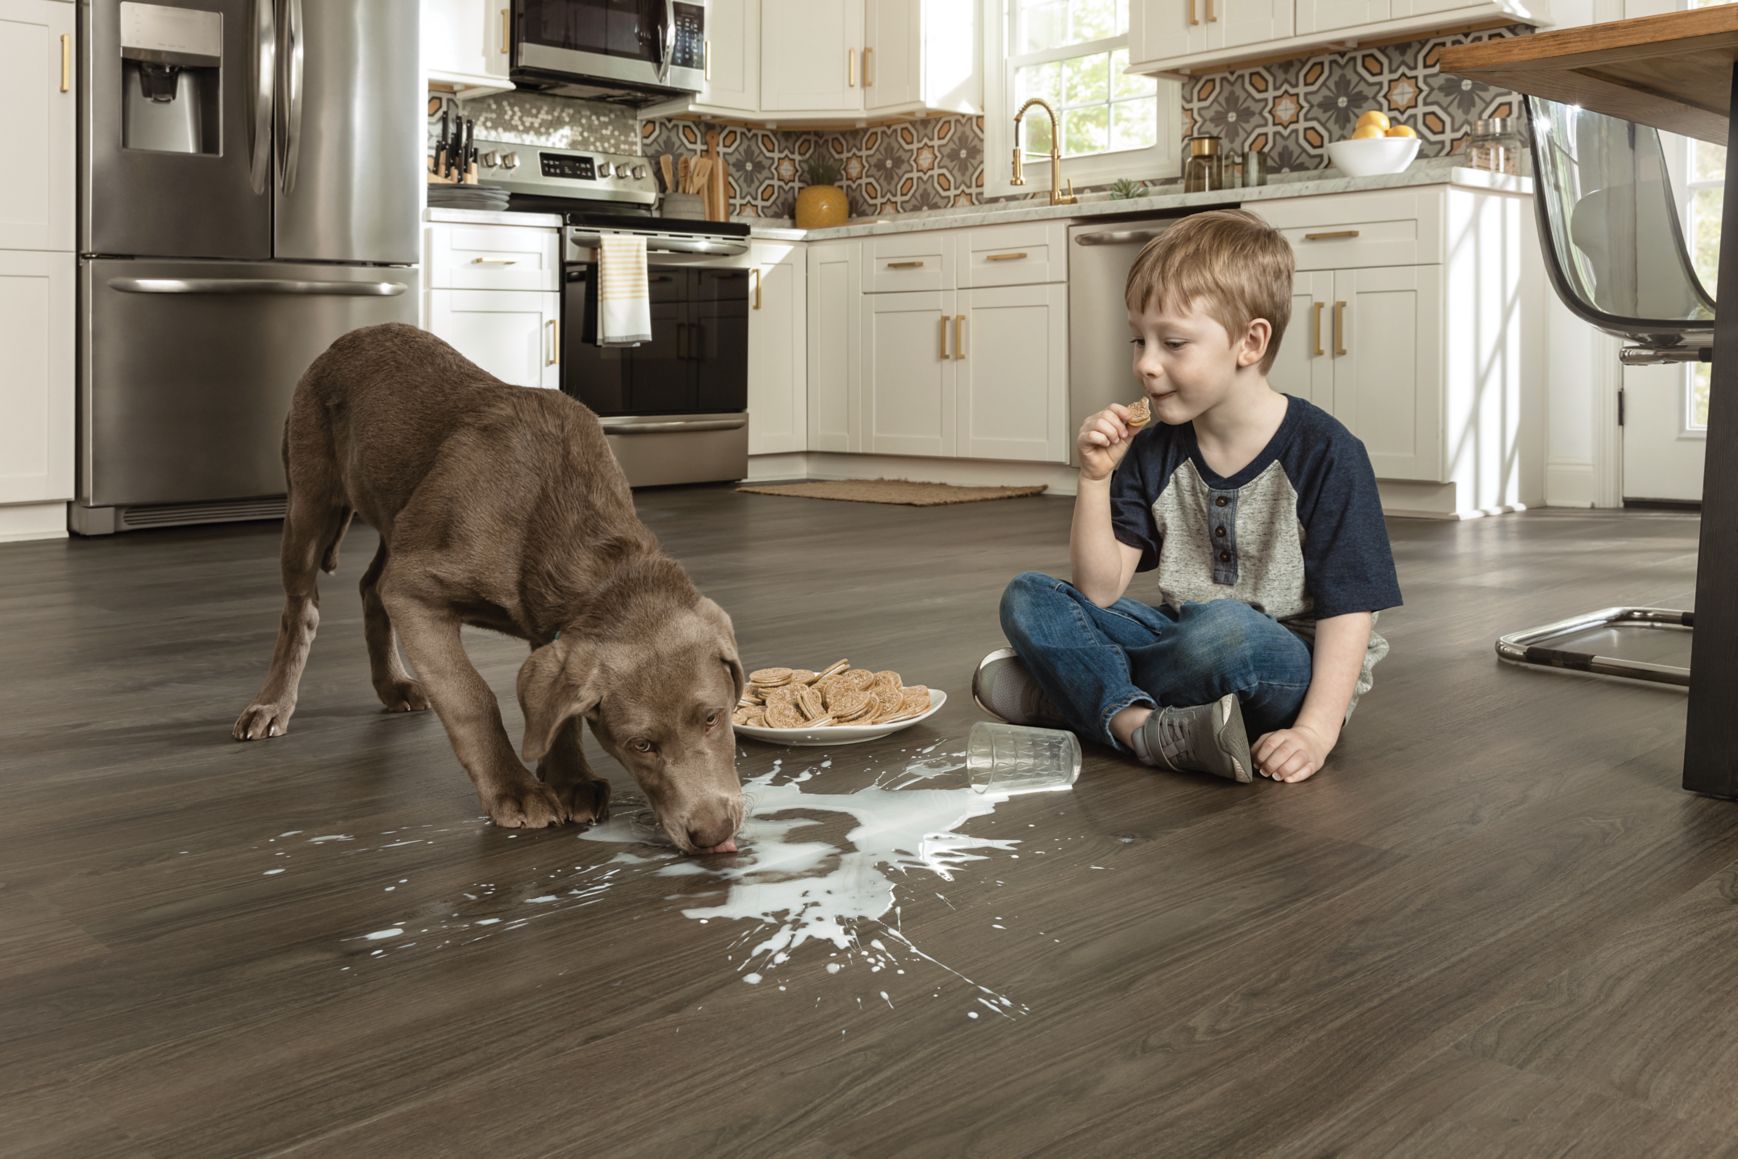 pet-friendly floors in kitchen with dog and child making mess